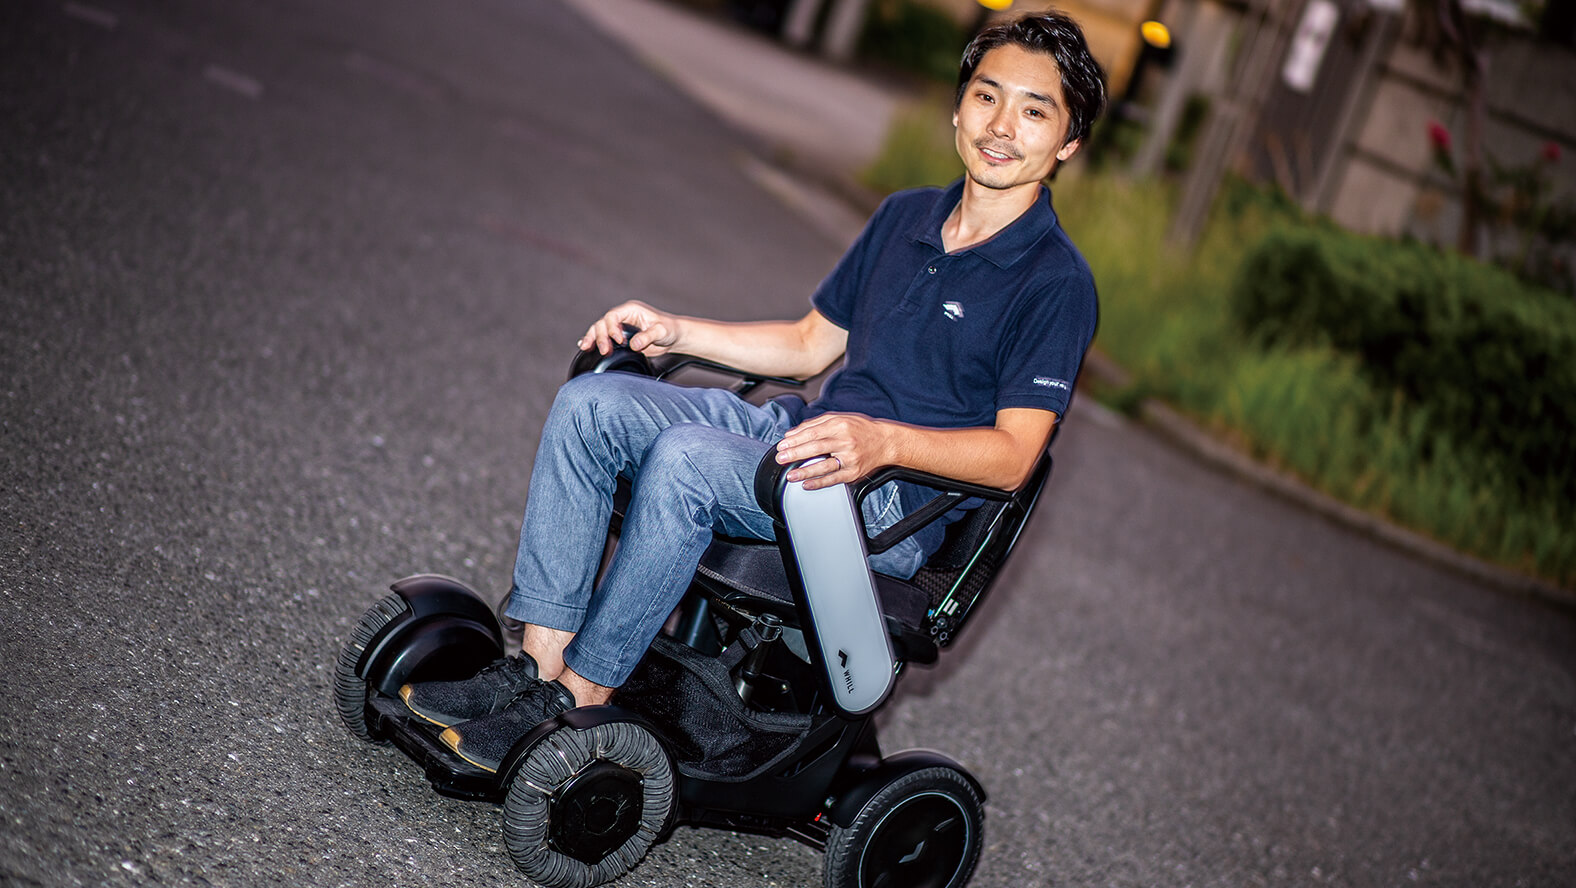 Revolutionary personal electric vehicle WHILL